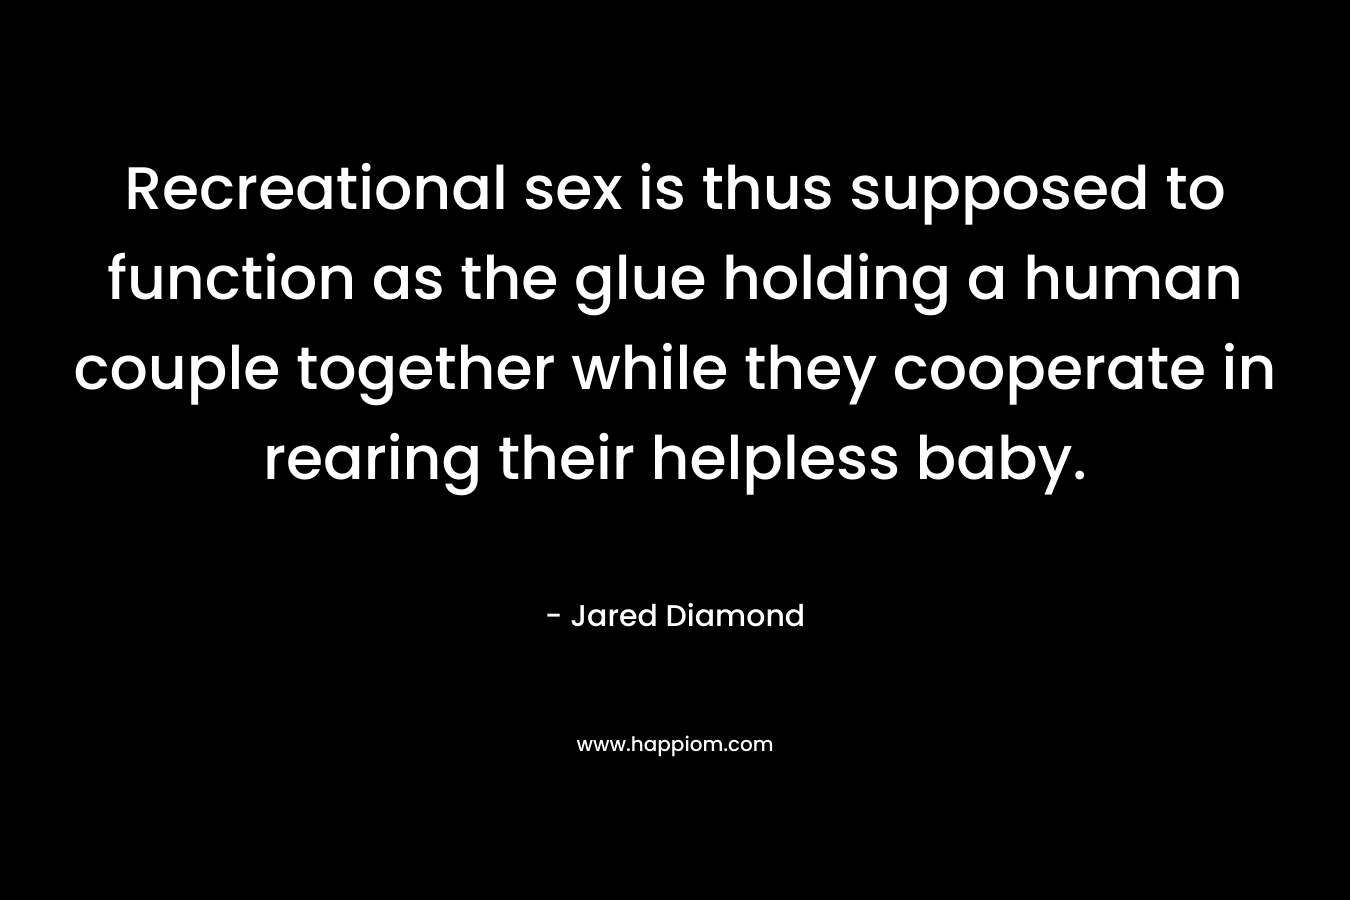 Recreational sex is thus supposed to function as the glue holding a human couple together while they cooperate in rearing their helpless baby. – Jared Diamond